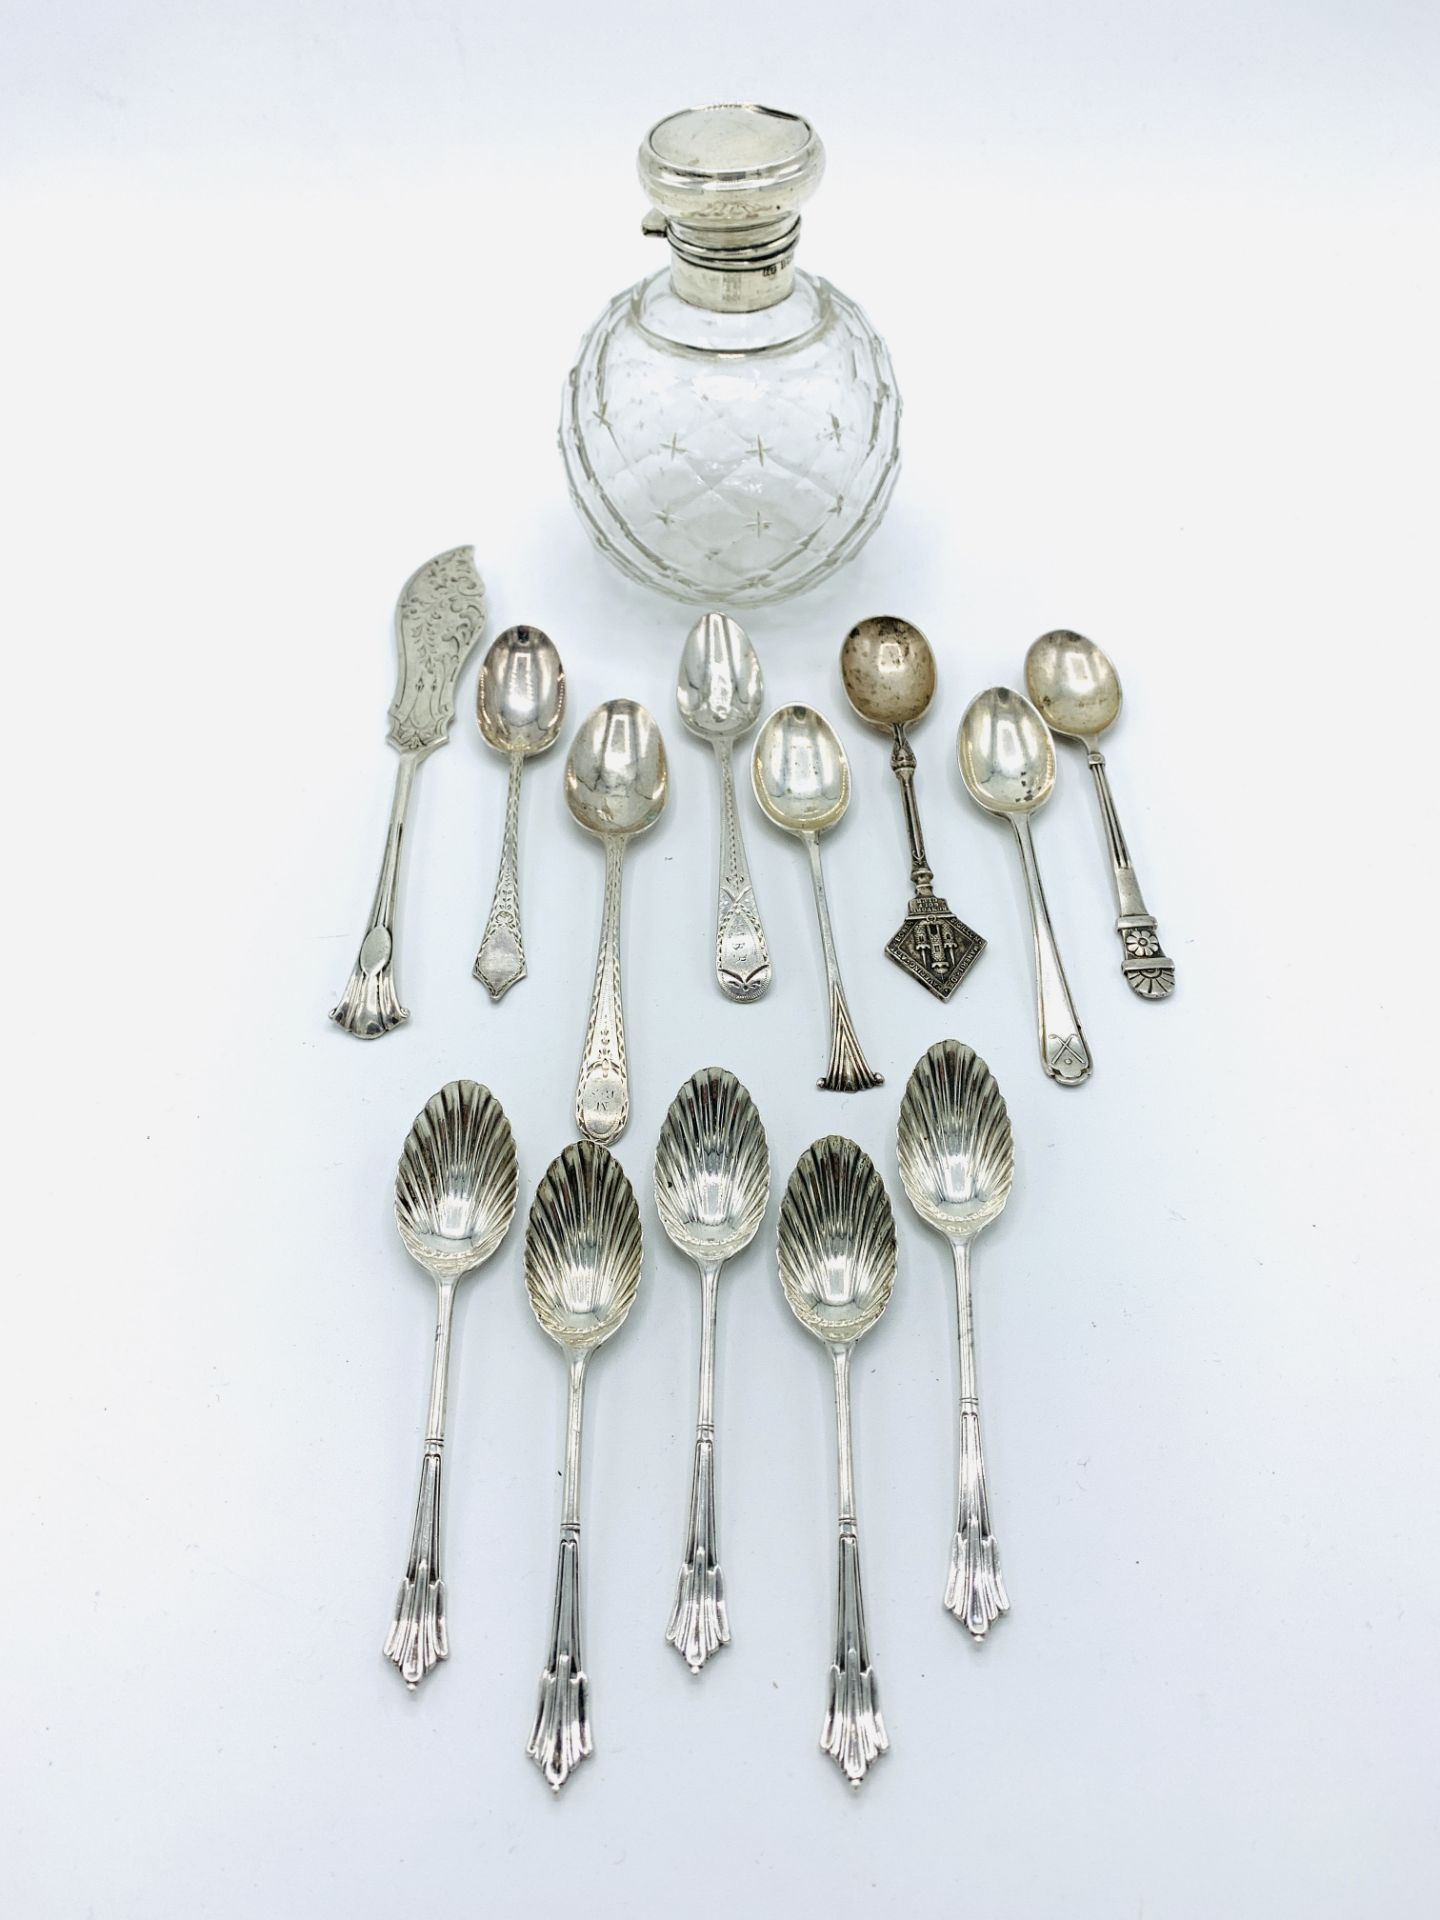 A quantity of silver teaspoons and other items